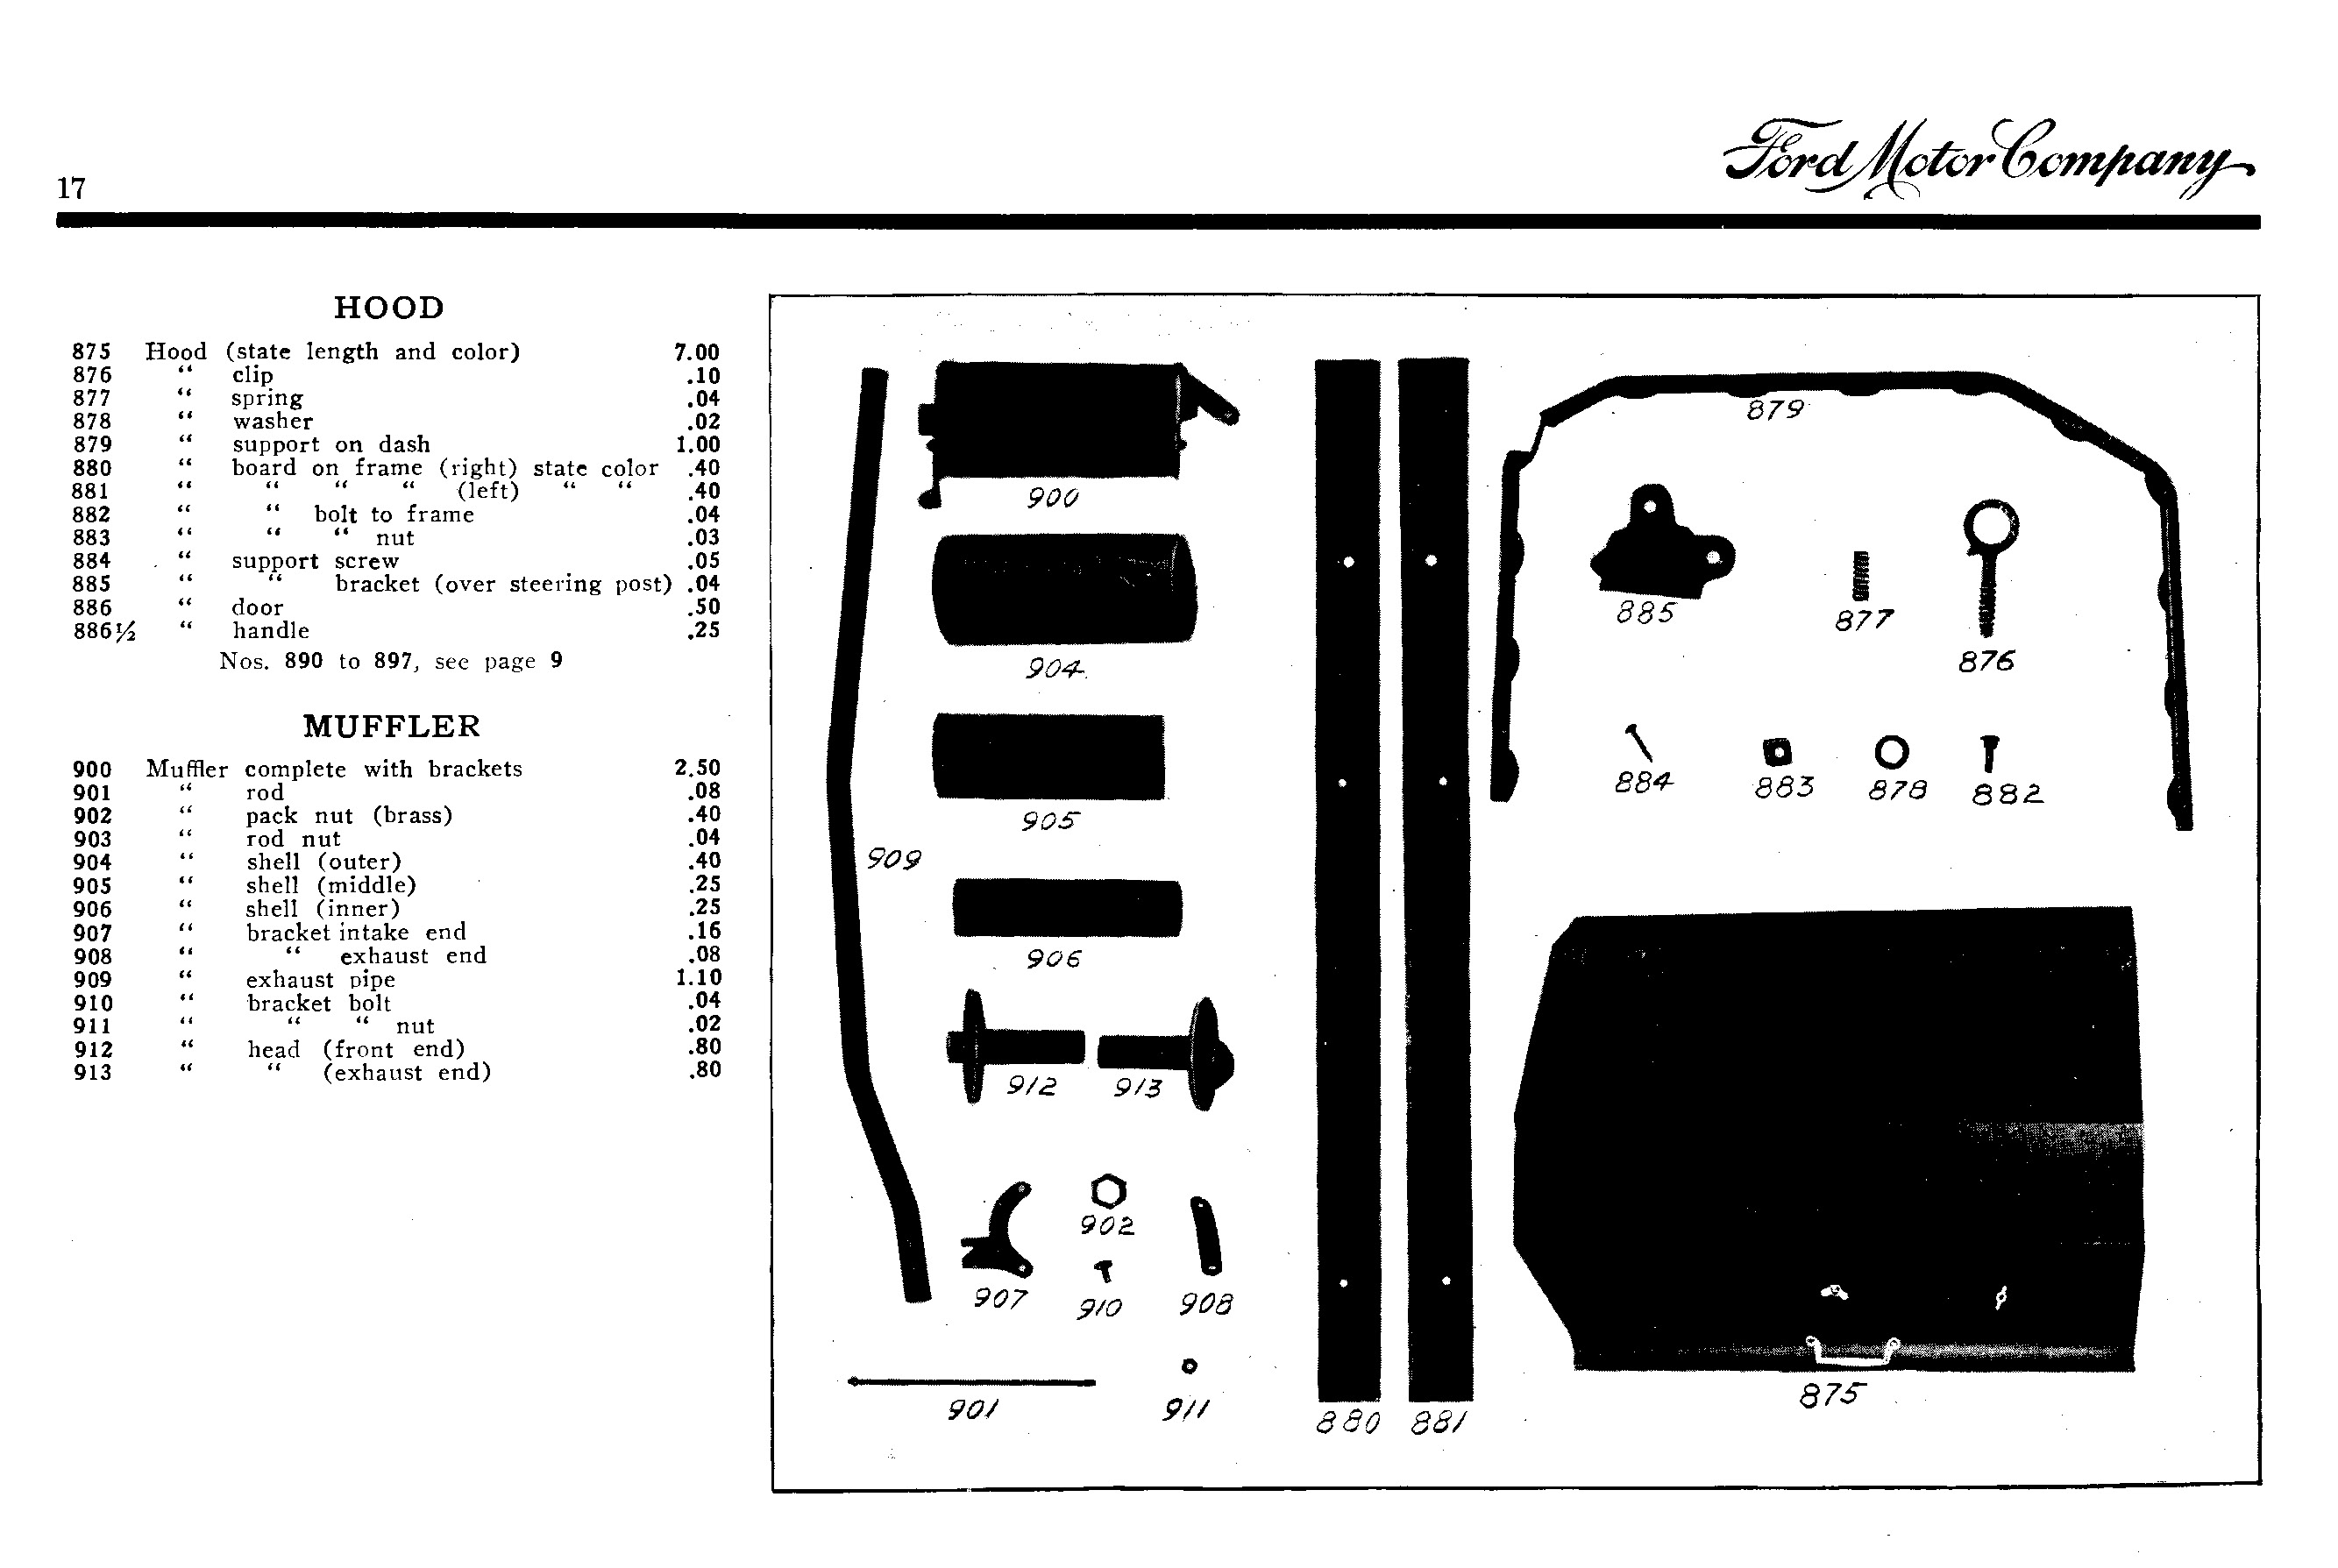 1907_Ford_Roadster_Parts_List-17